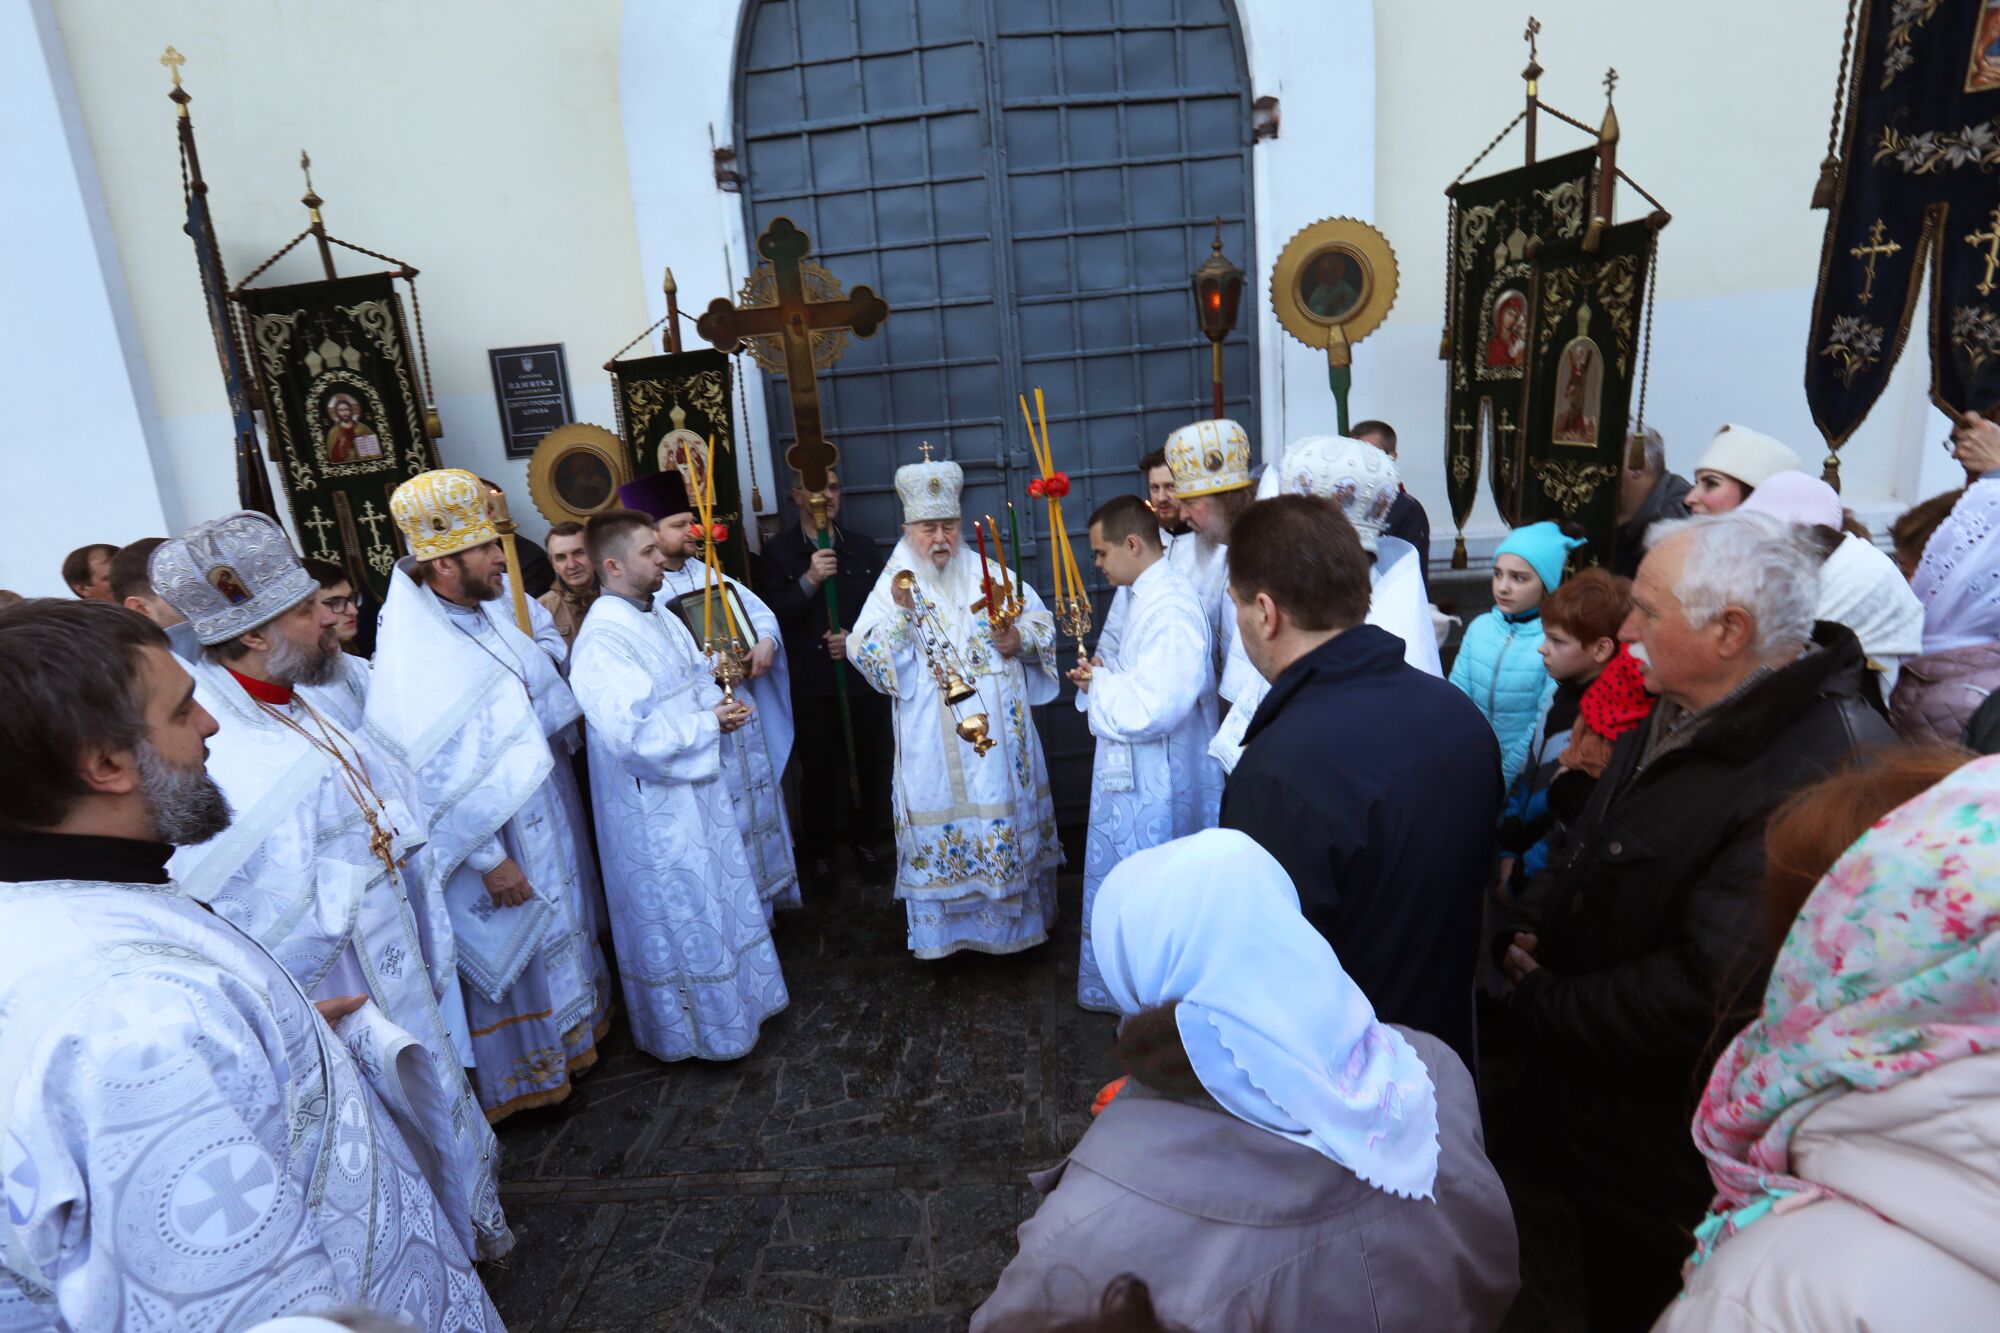 Men in white robes and hats with worshipers at church 